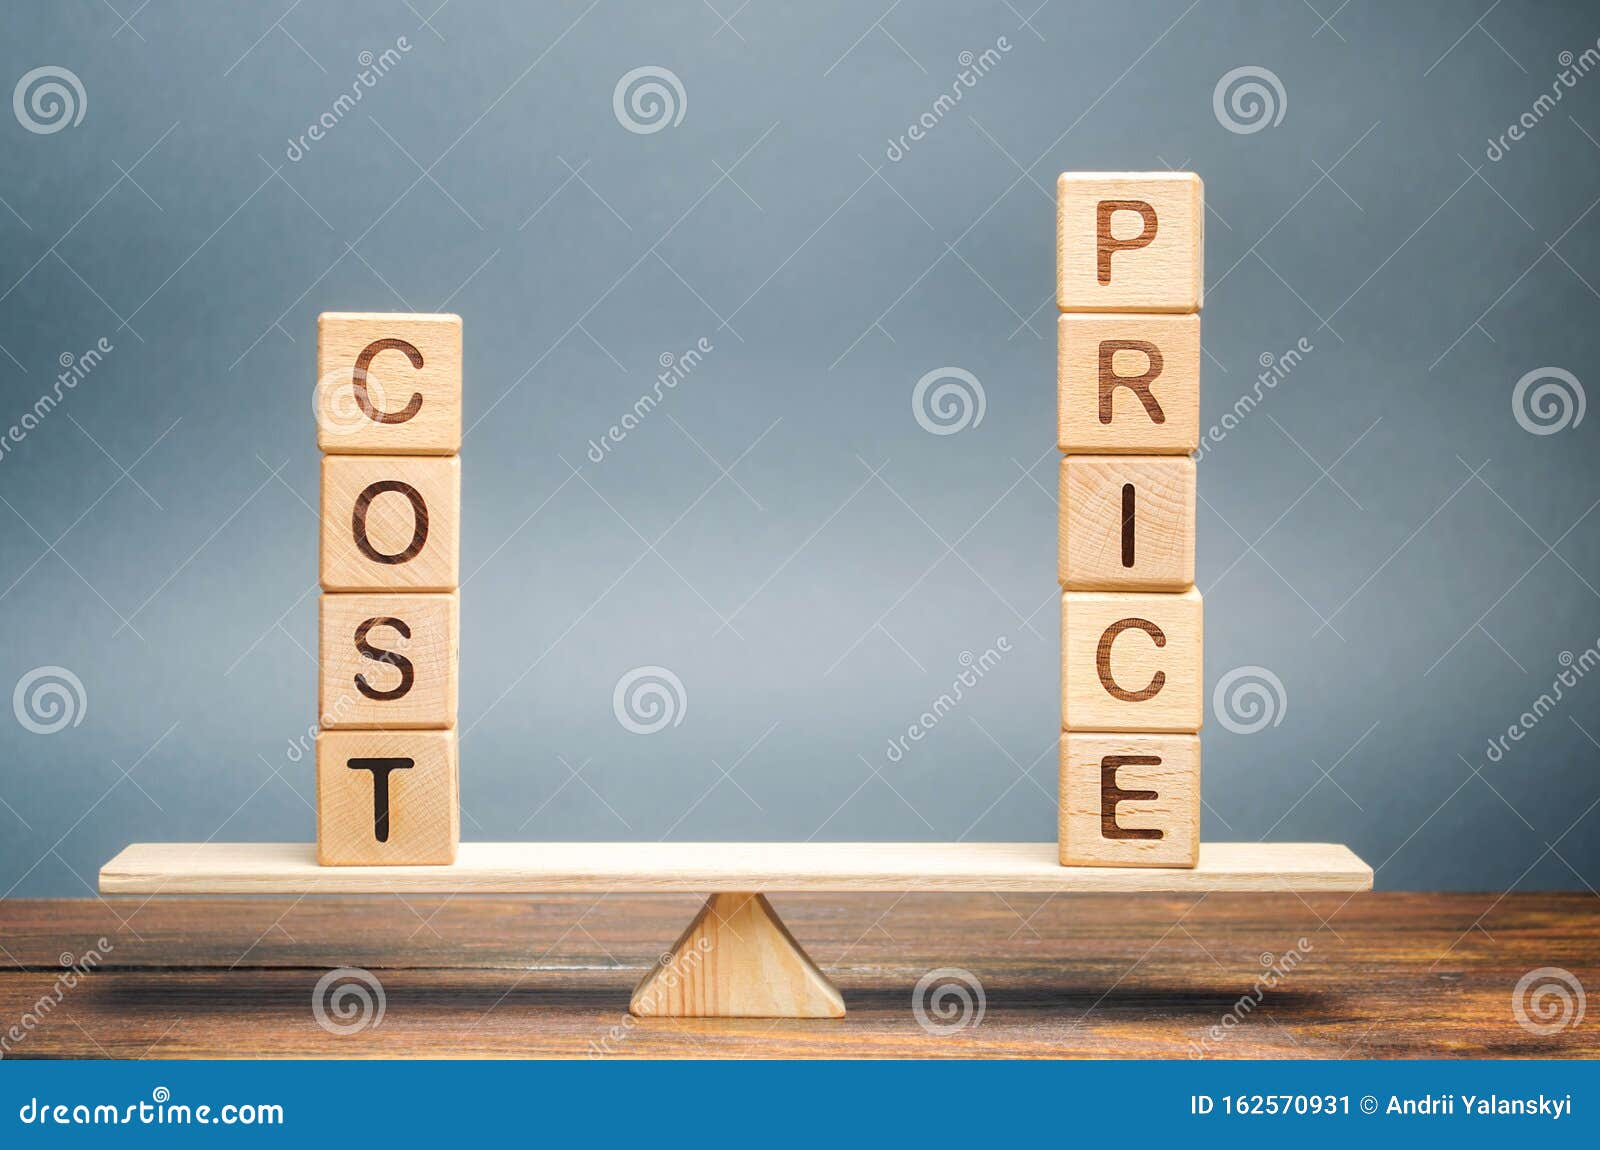 wooden blocks with the word cost and price on the scales. the concept of equivalence. optimal price. a fair deal. evaluation of